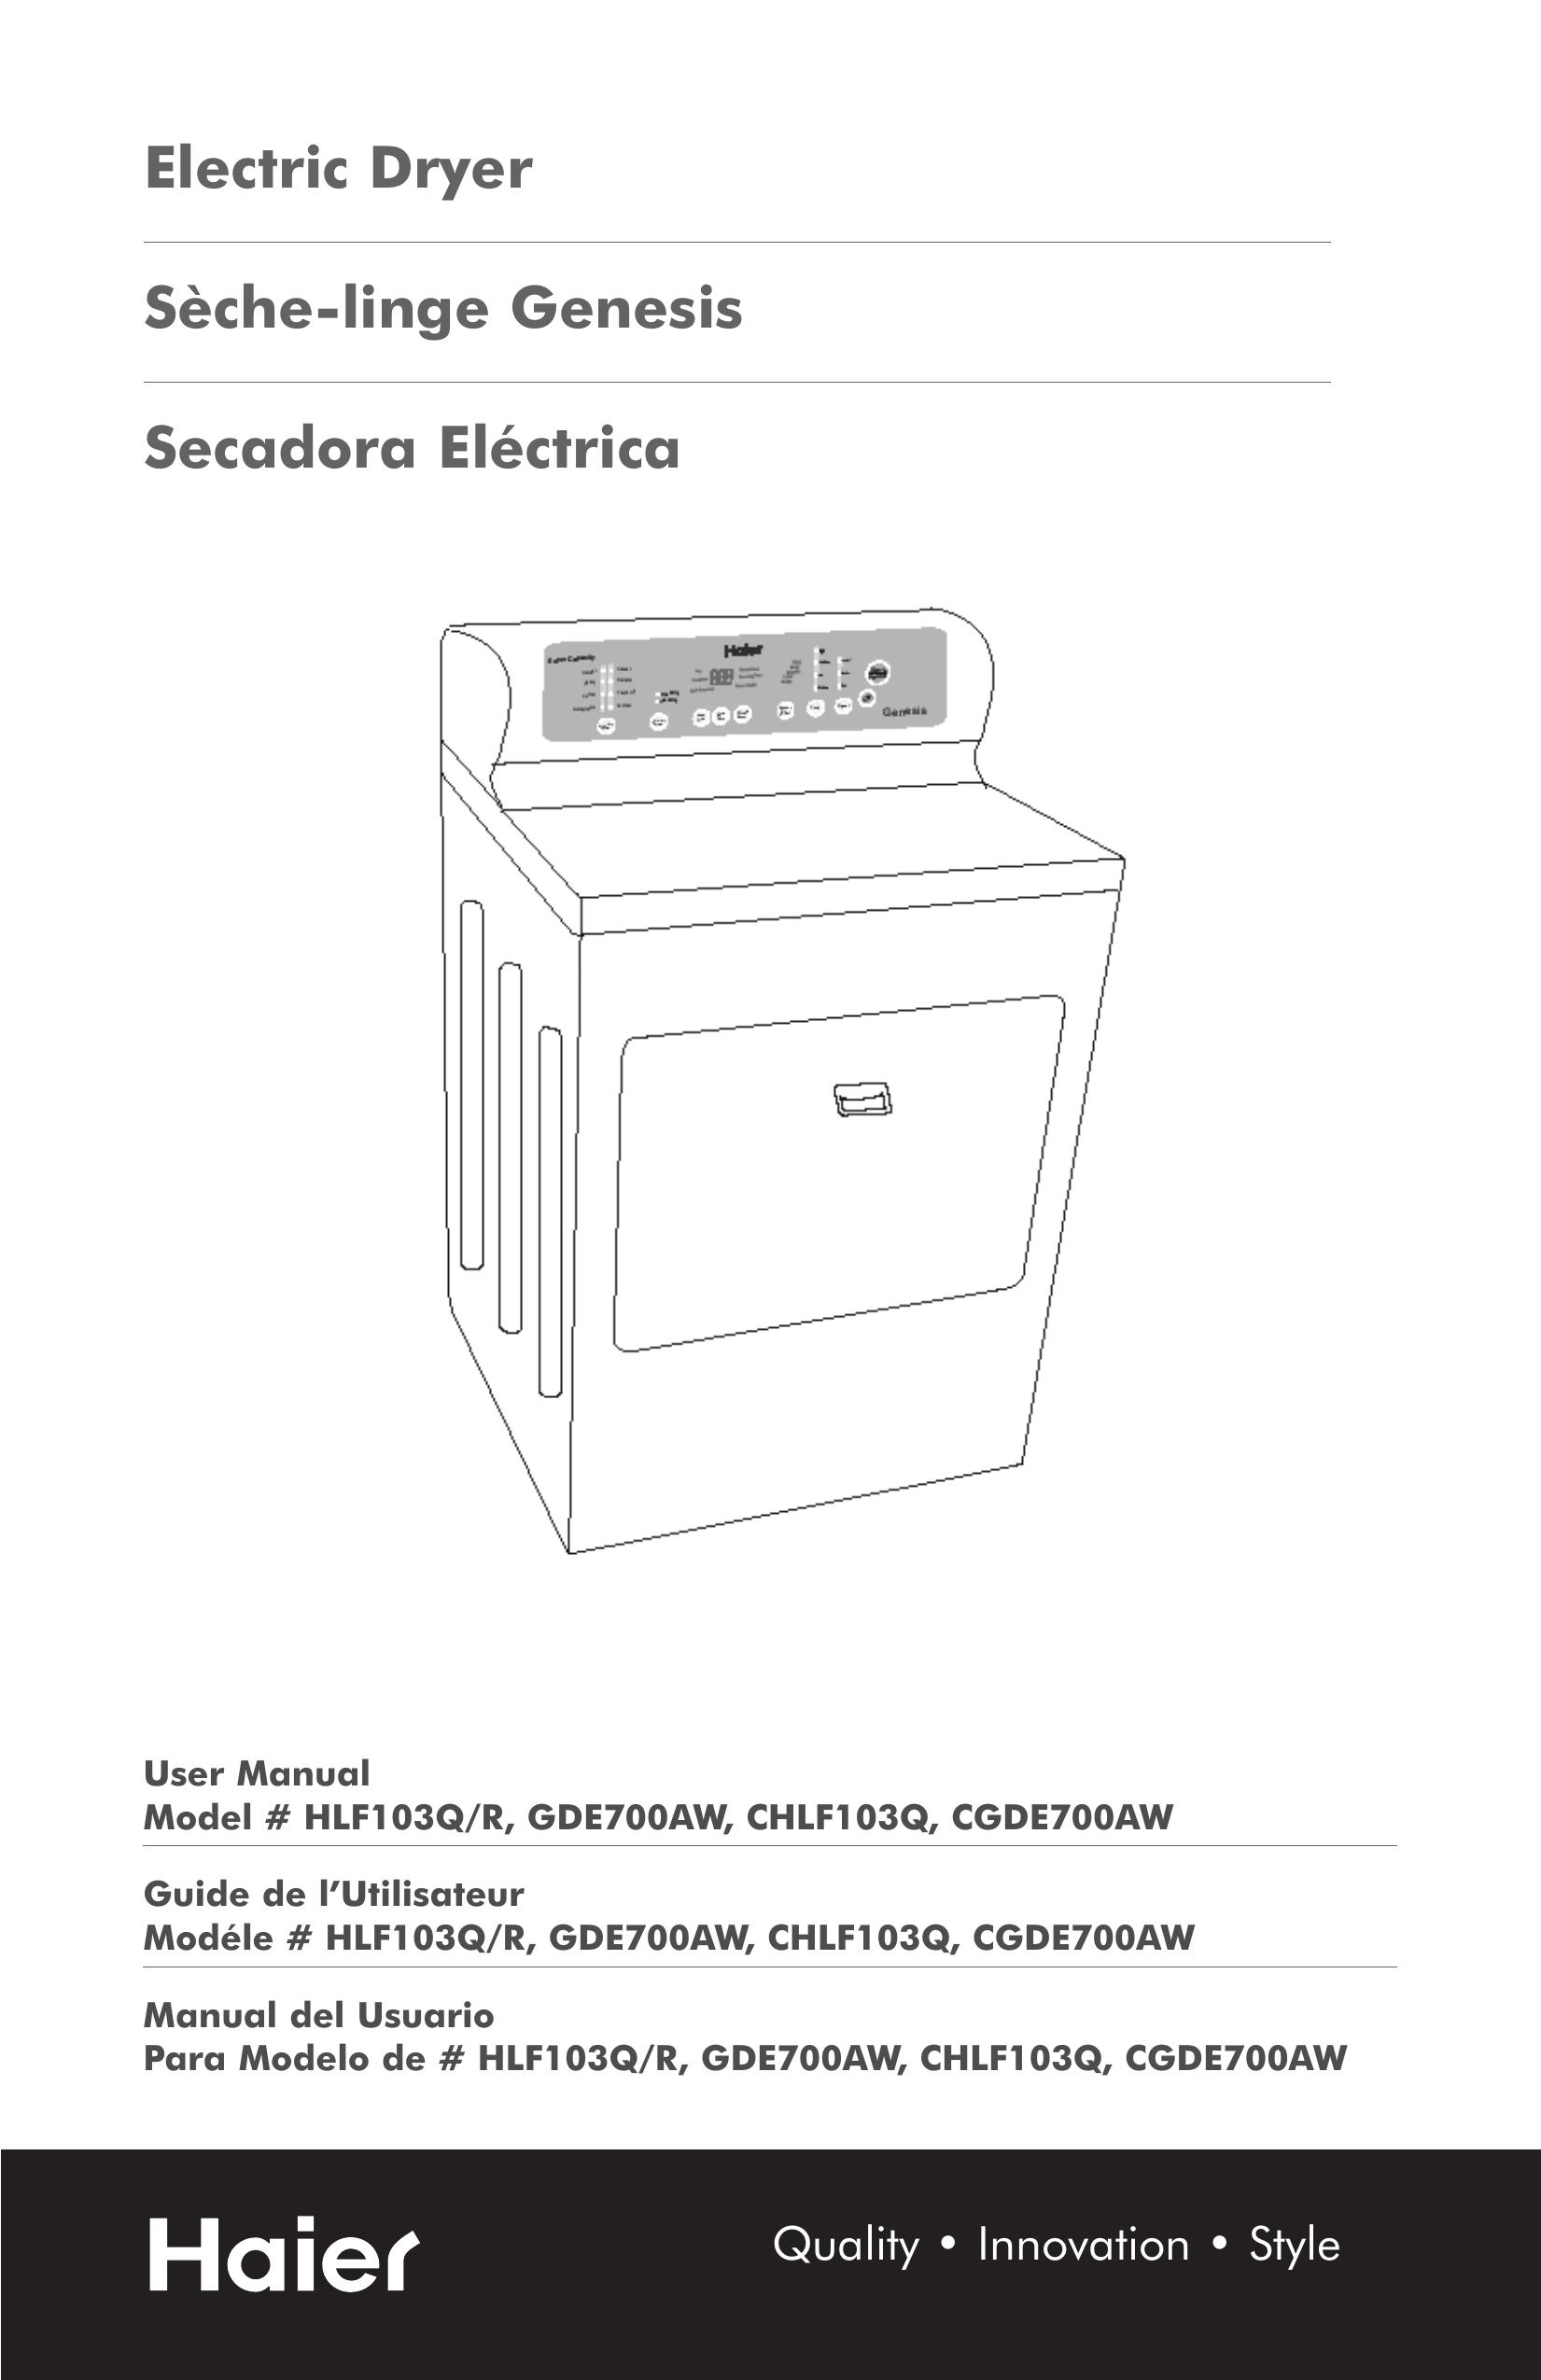 Haier CGDE700AW Clothes Dryer User Manual